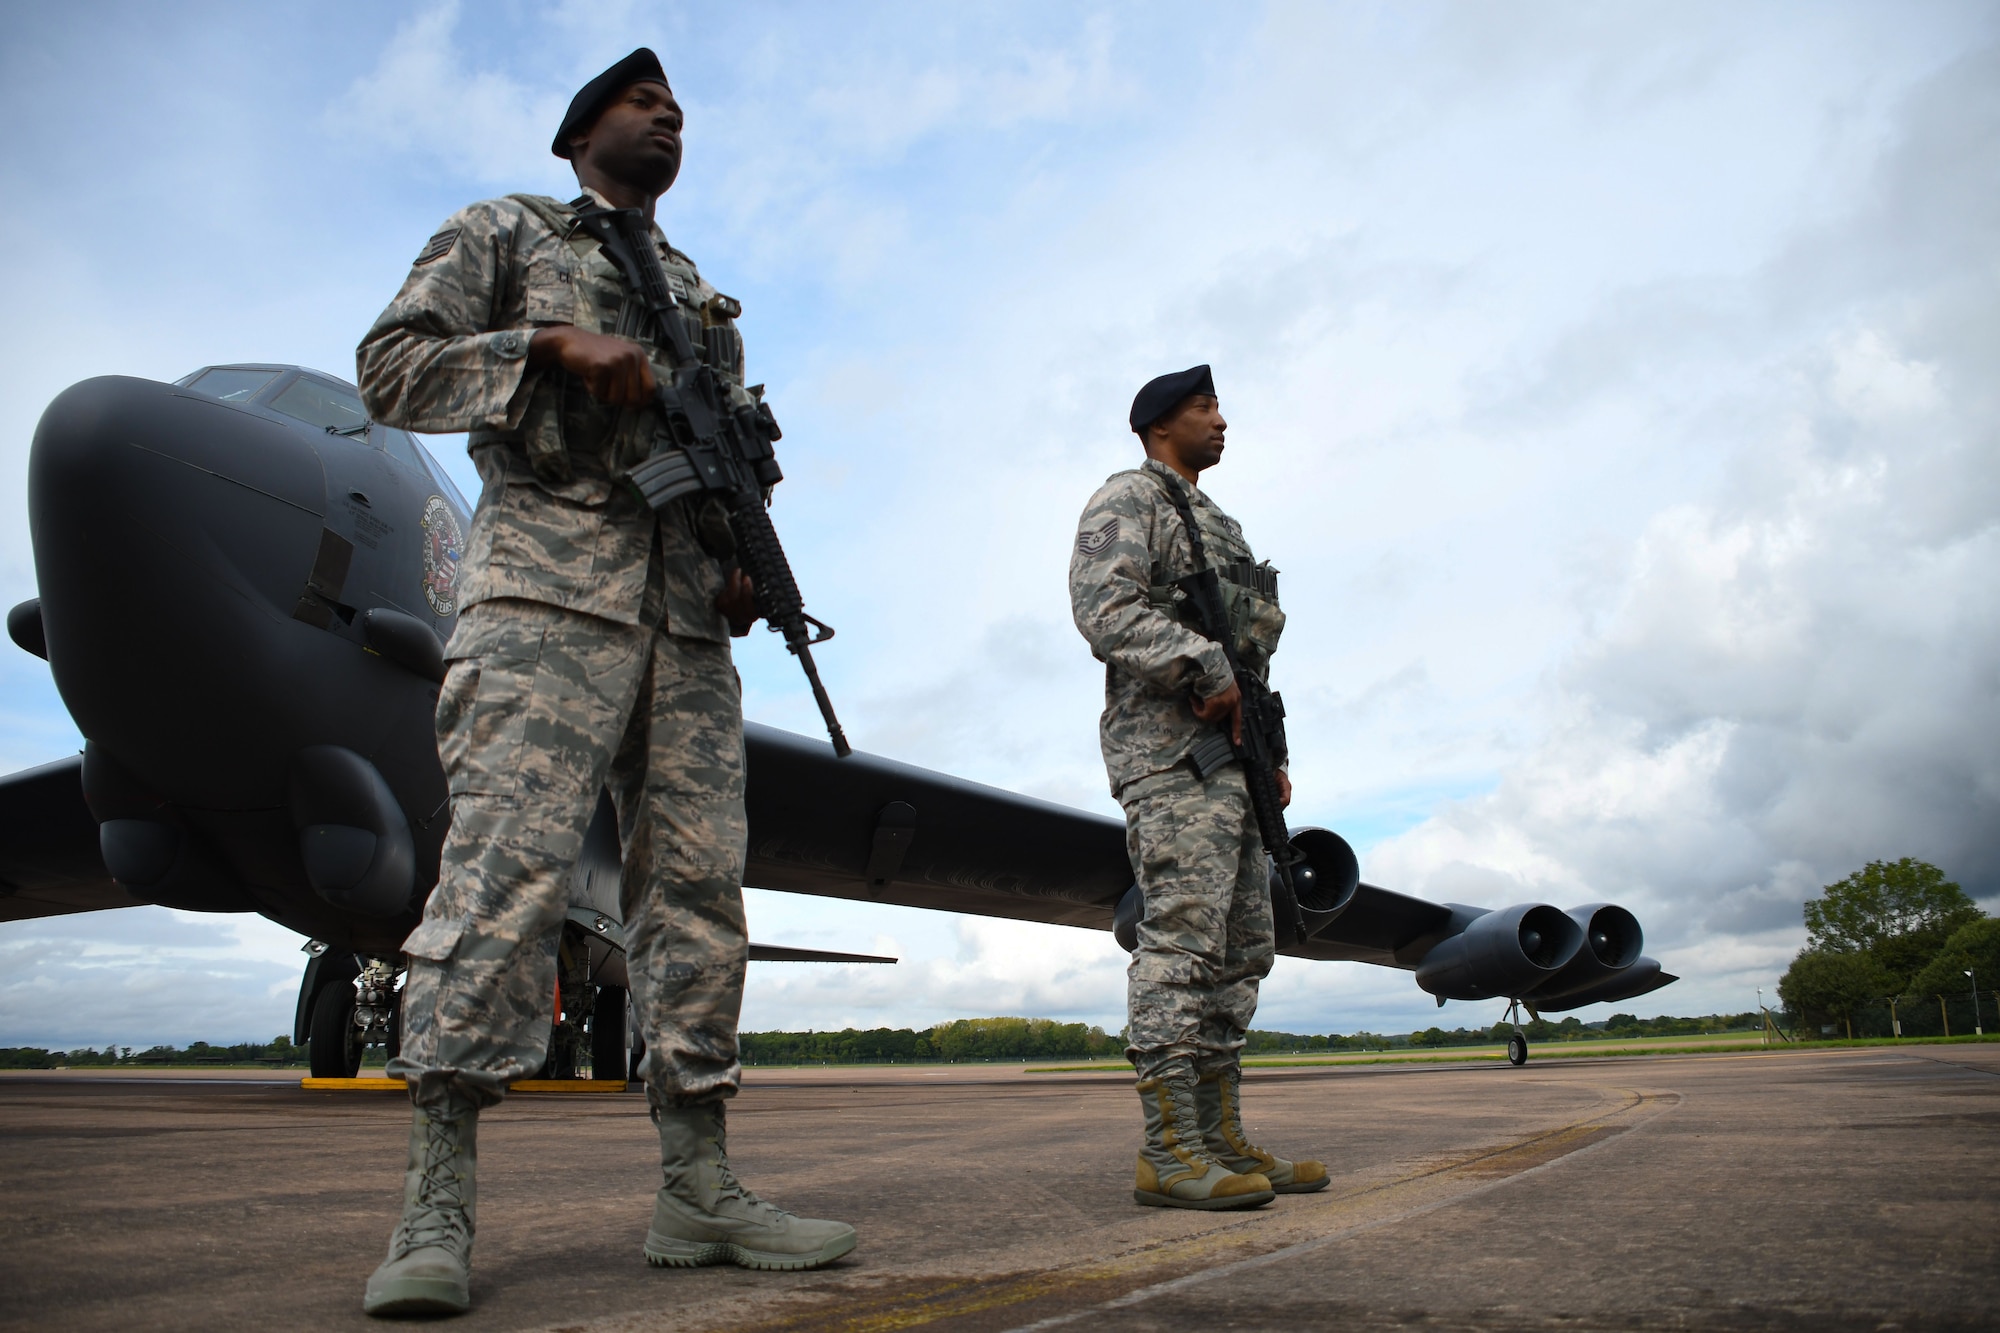 Airmen of the 307th Security Forces Squadron guard a B-52 Stratofortress at Royal Air Force Fairford, United Kingdom, Sep. 4, 2017.